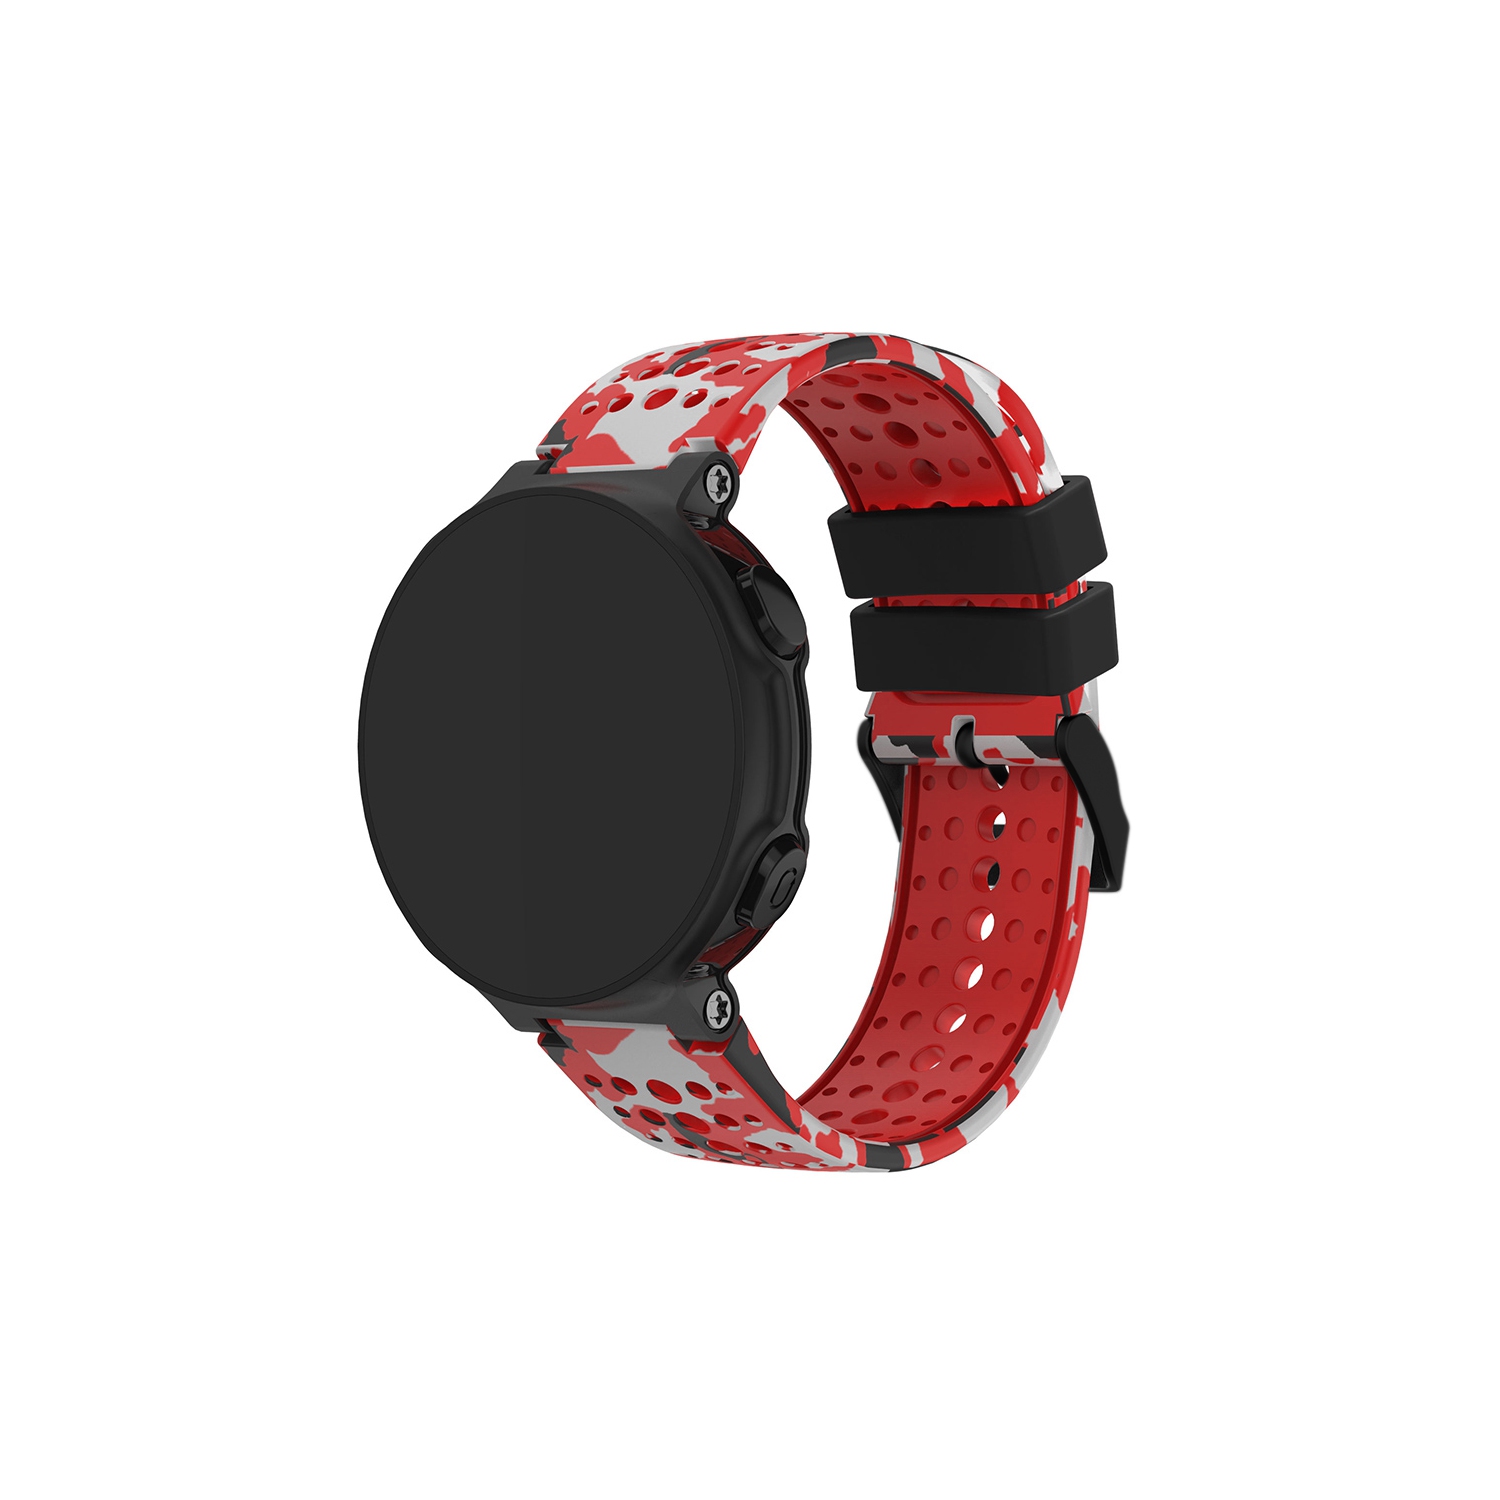 StrapsCo Rubber Watch Band with Black Buckle for Garmin Forerunner 200/230/235/620/630/735XT & Approach S5/S6/S20 - Red Camo